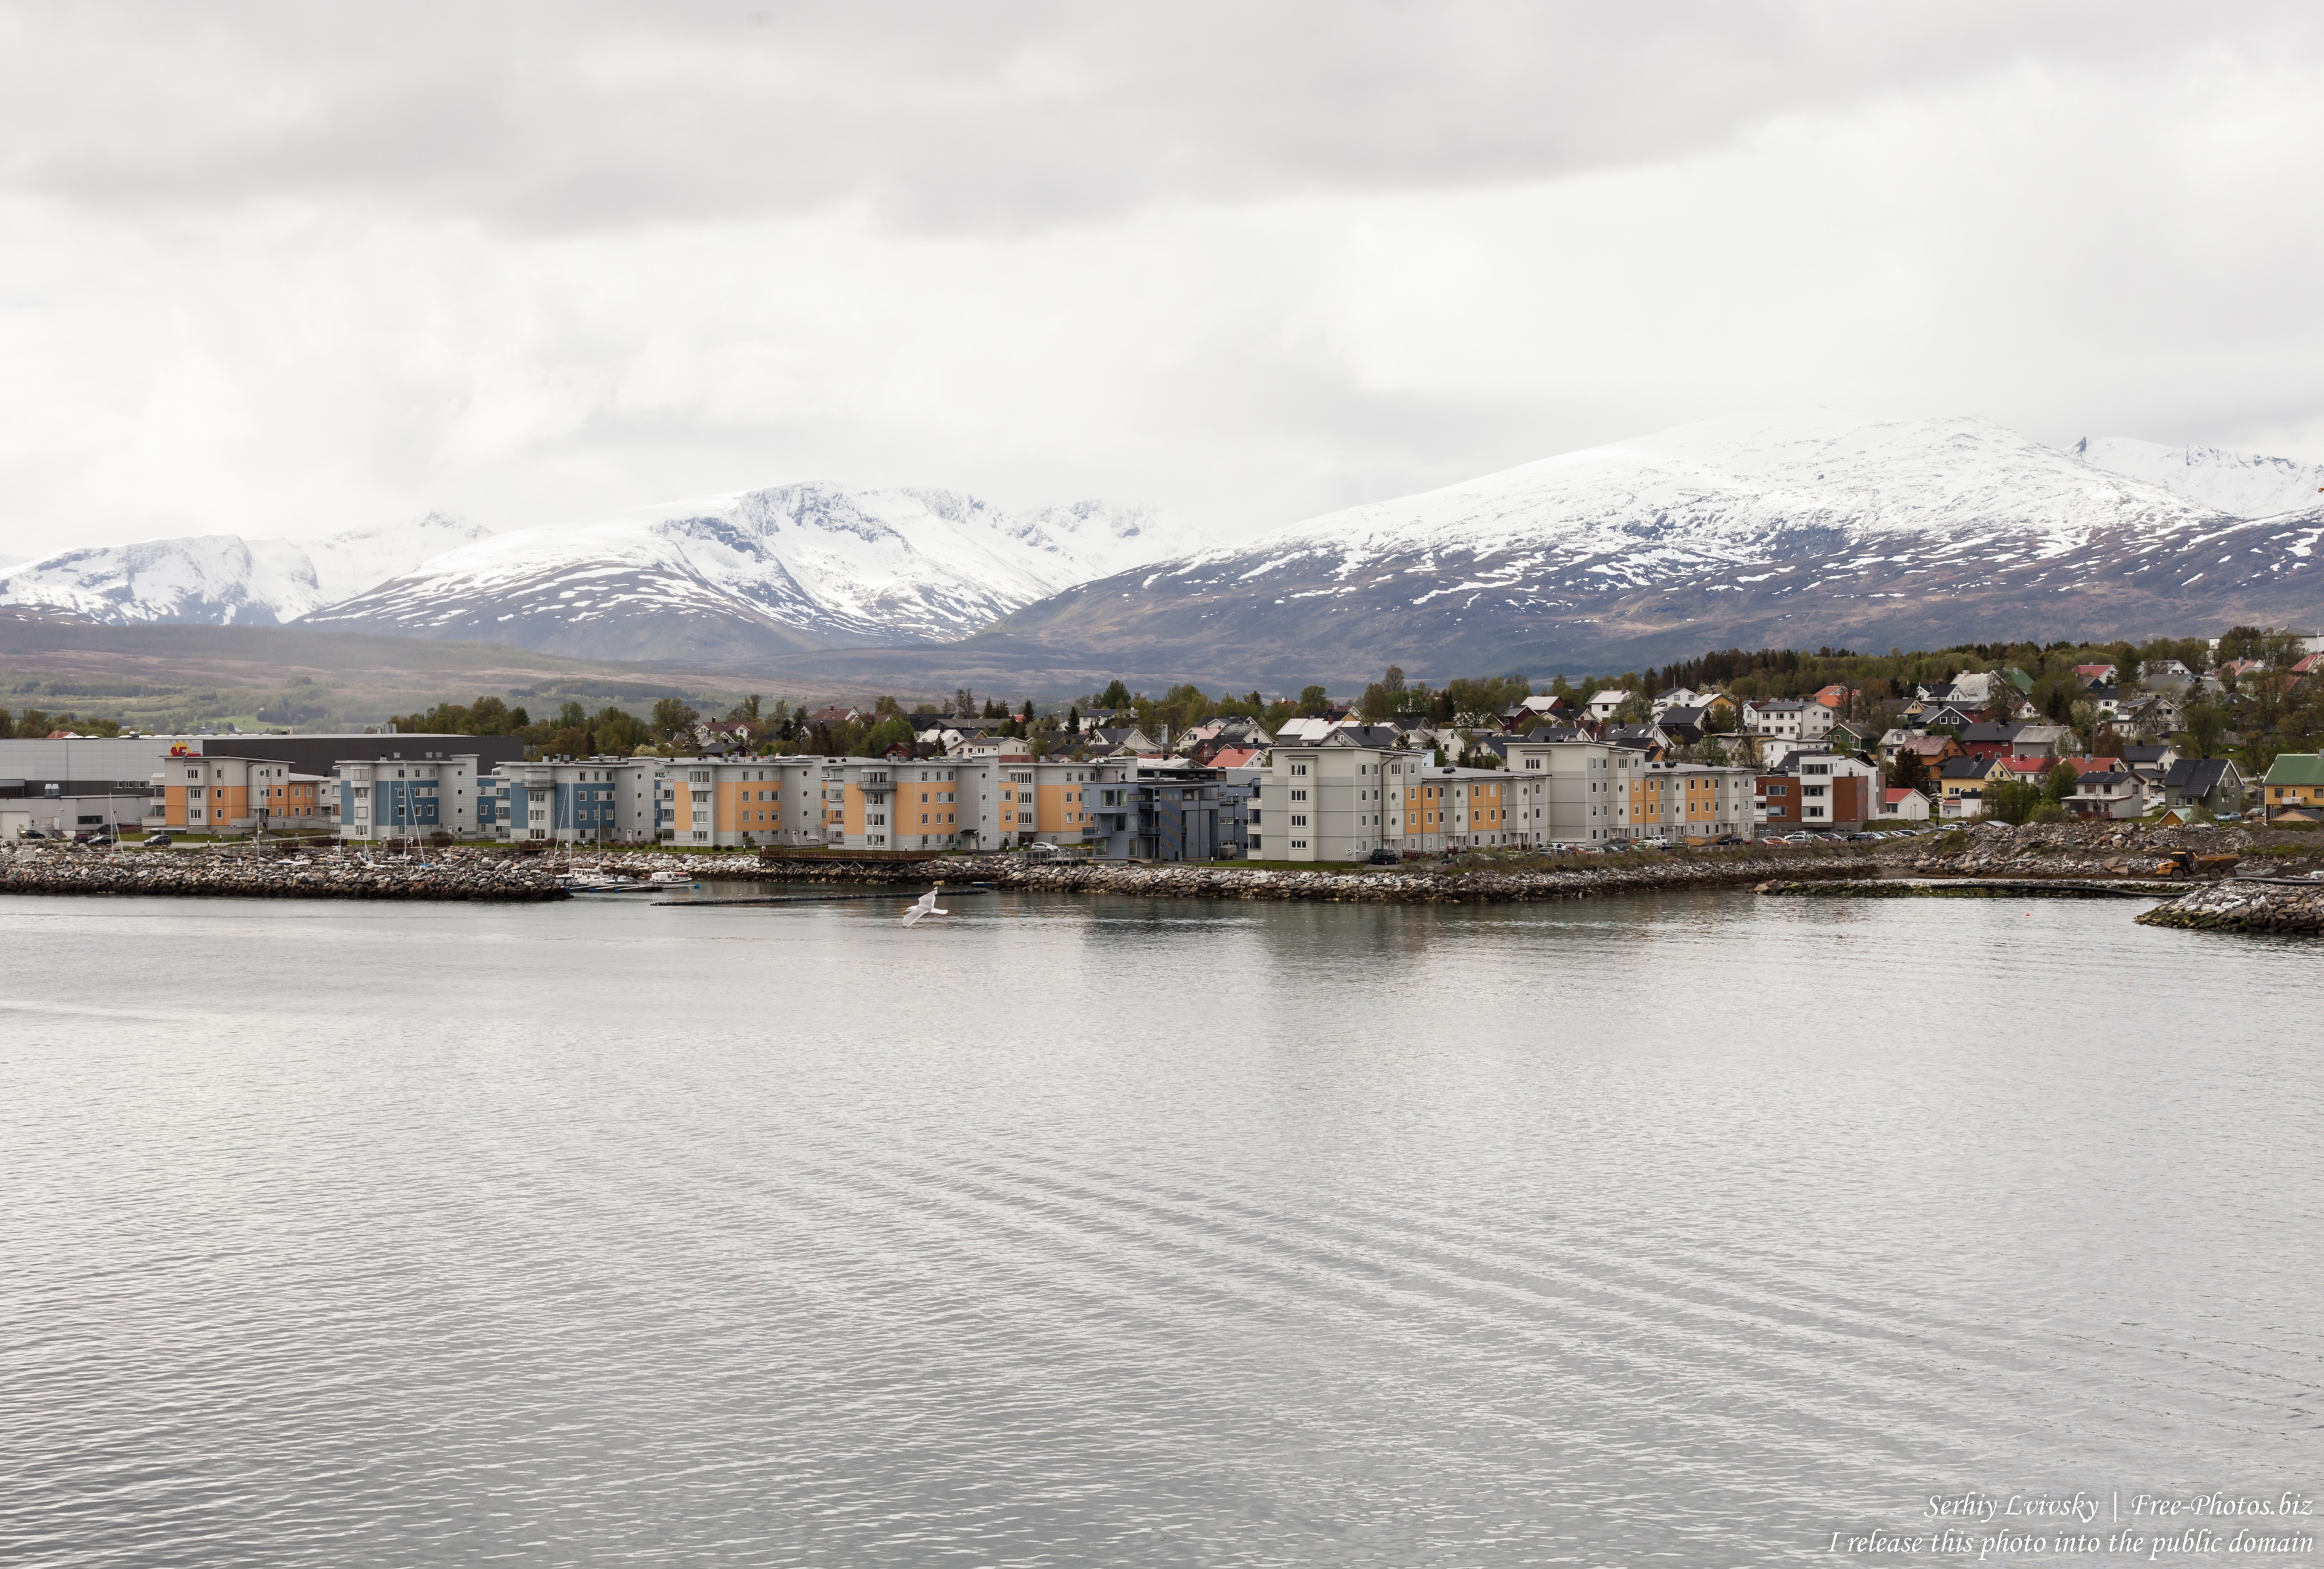 Tromso, Norway, photographed in June 2018 by Serhiy Lvivsky, picture 23